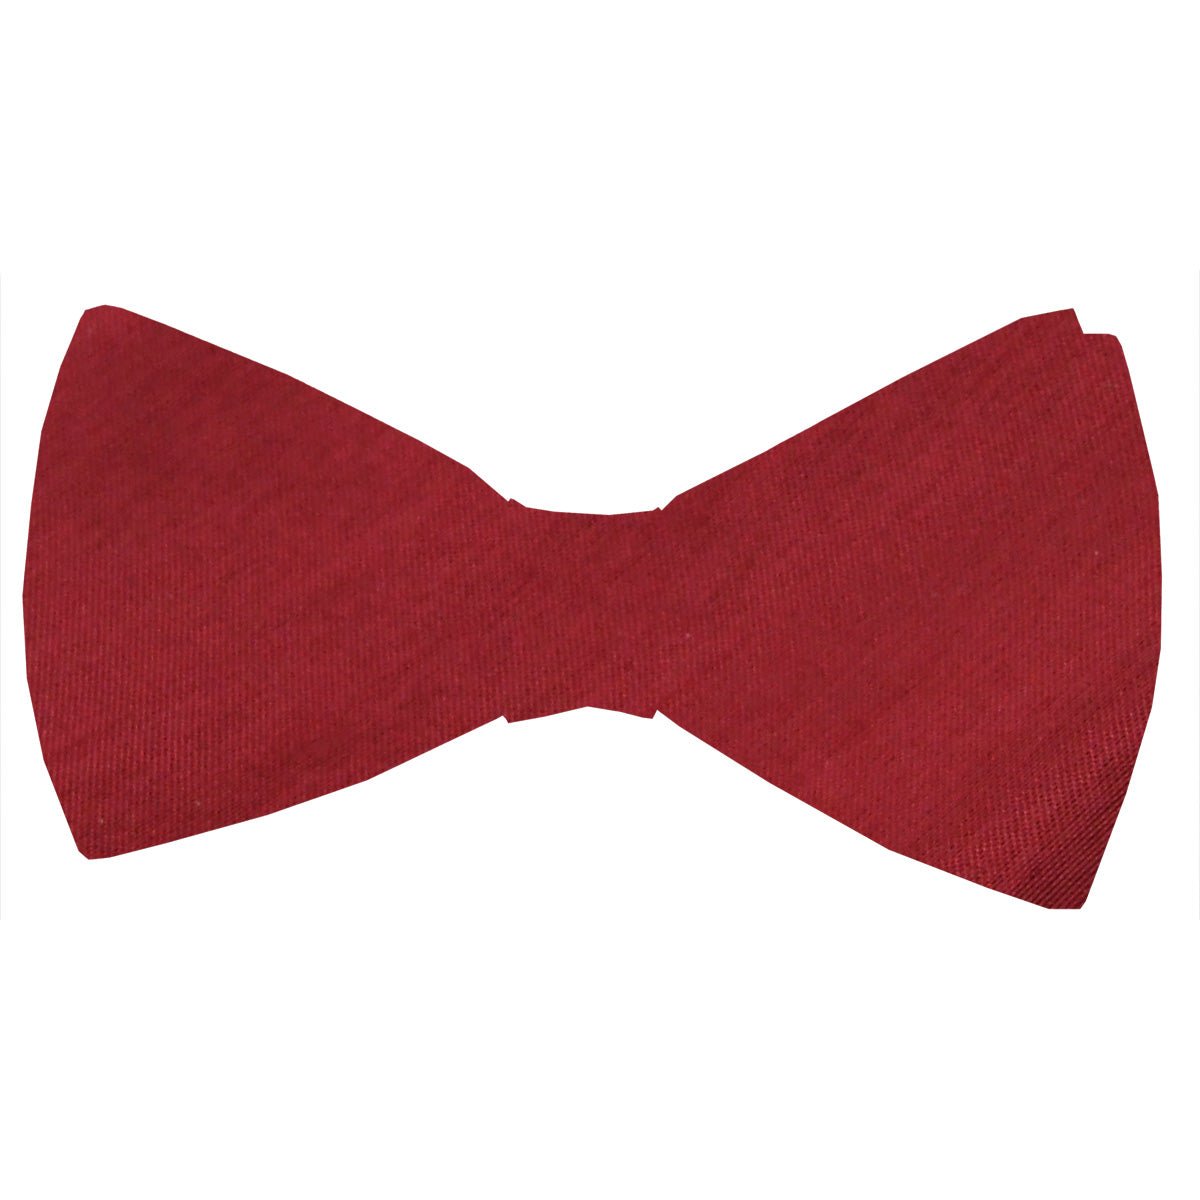 Crimson Shantung Bow Ties - Wedding Bow Tie - Pre-Tied - Swagger & Swoon